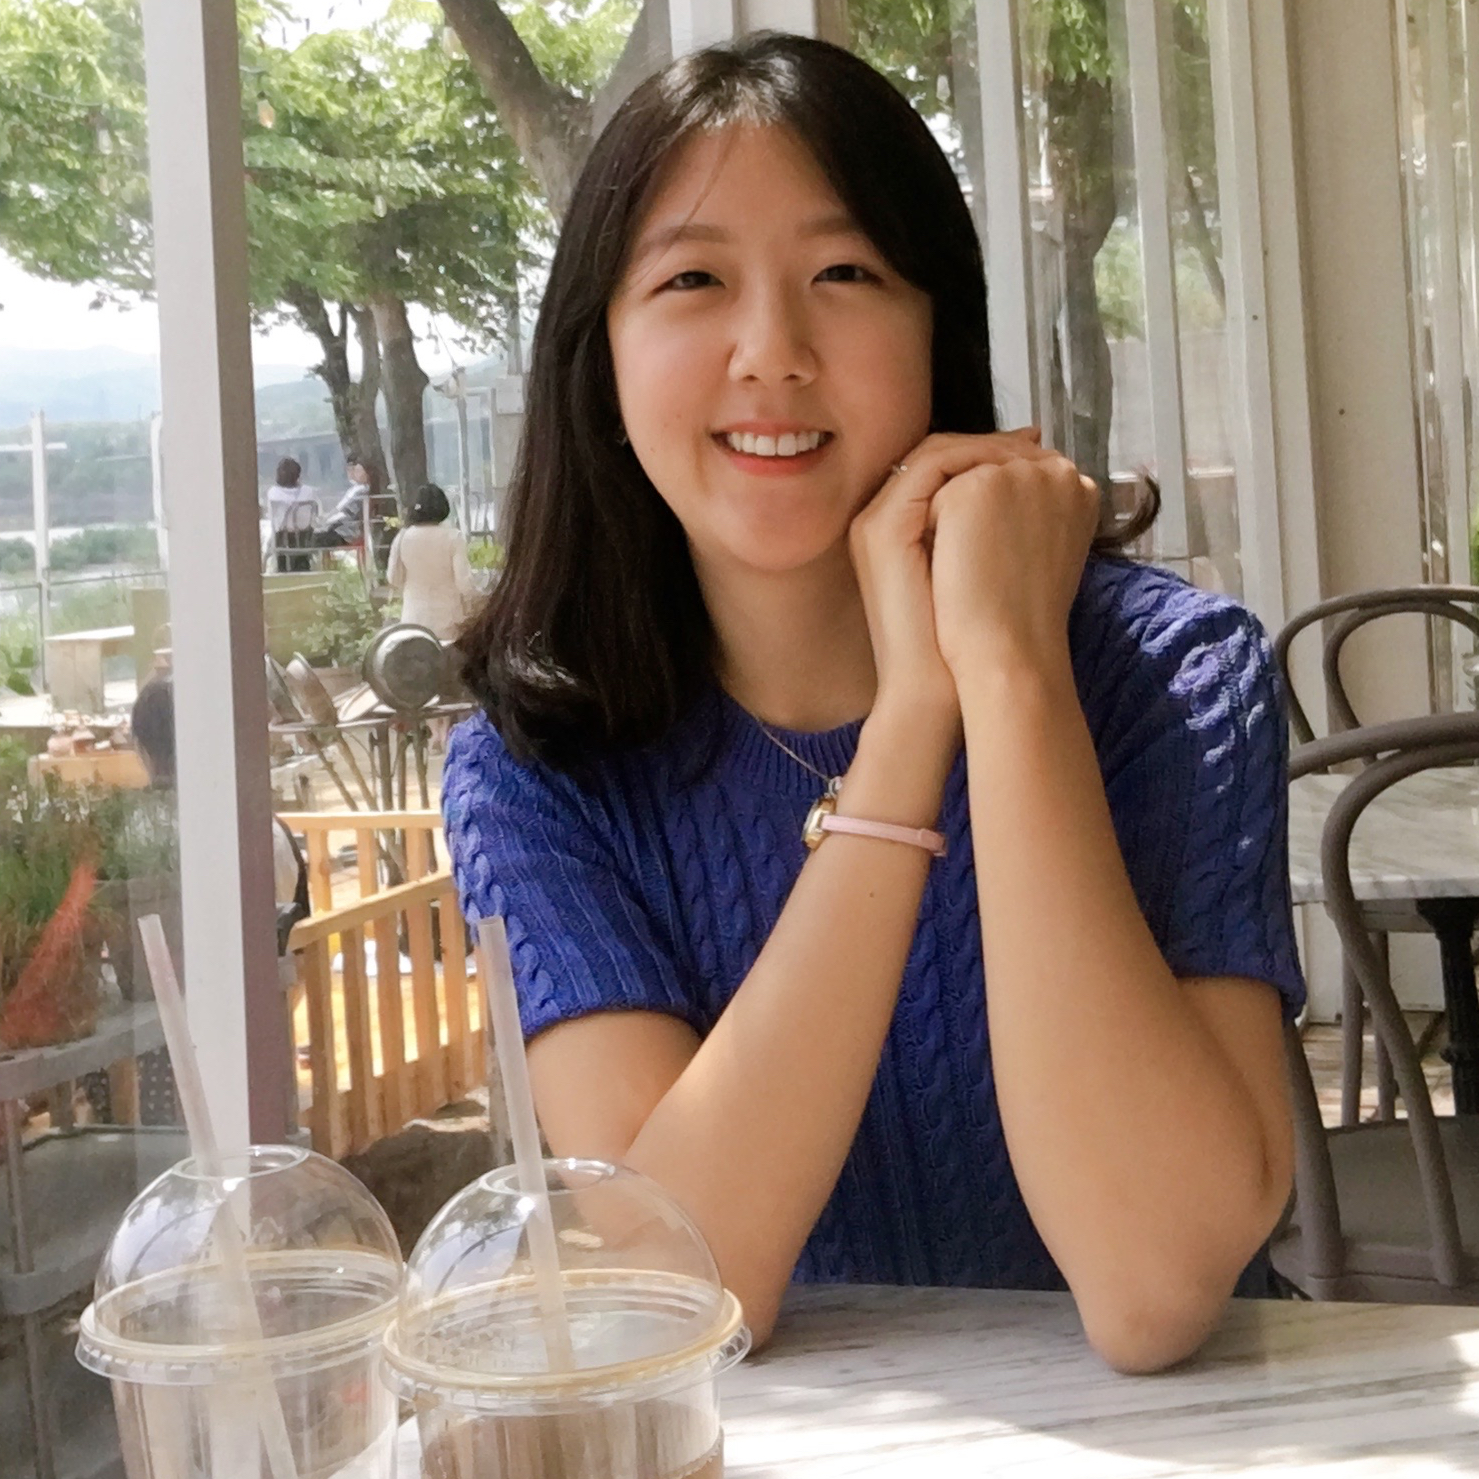 PhD student Eun-Kyoung Rosa Lee, sitting at a table in a sunlit cafe, trees visible through large windows behind her, and two cups of bubble tea in the foreground